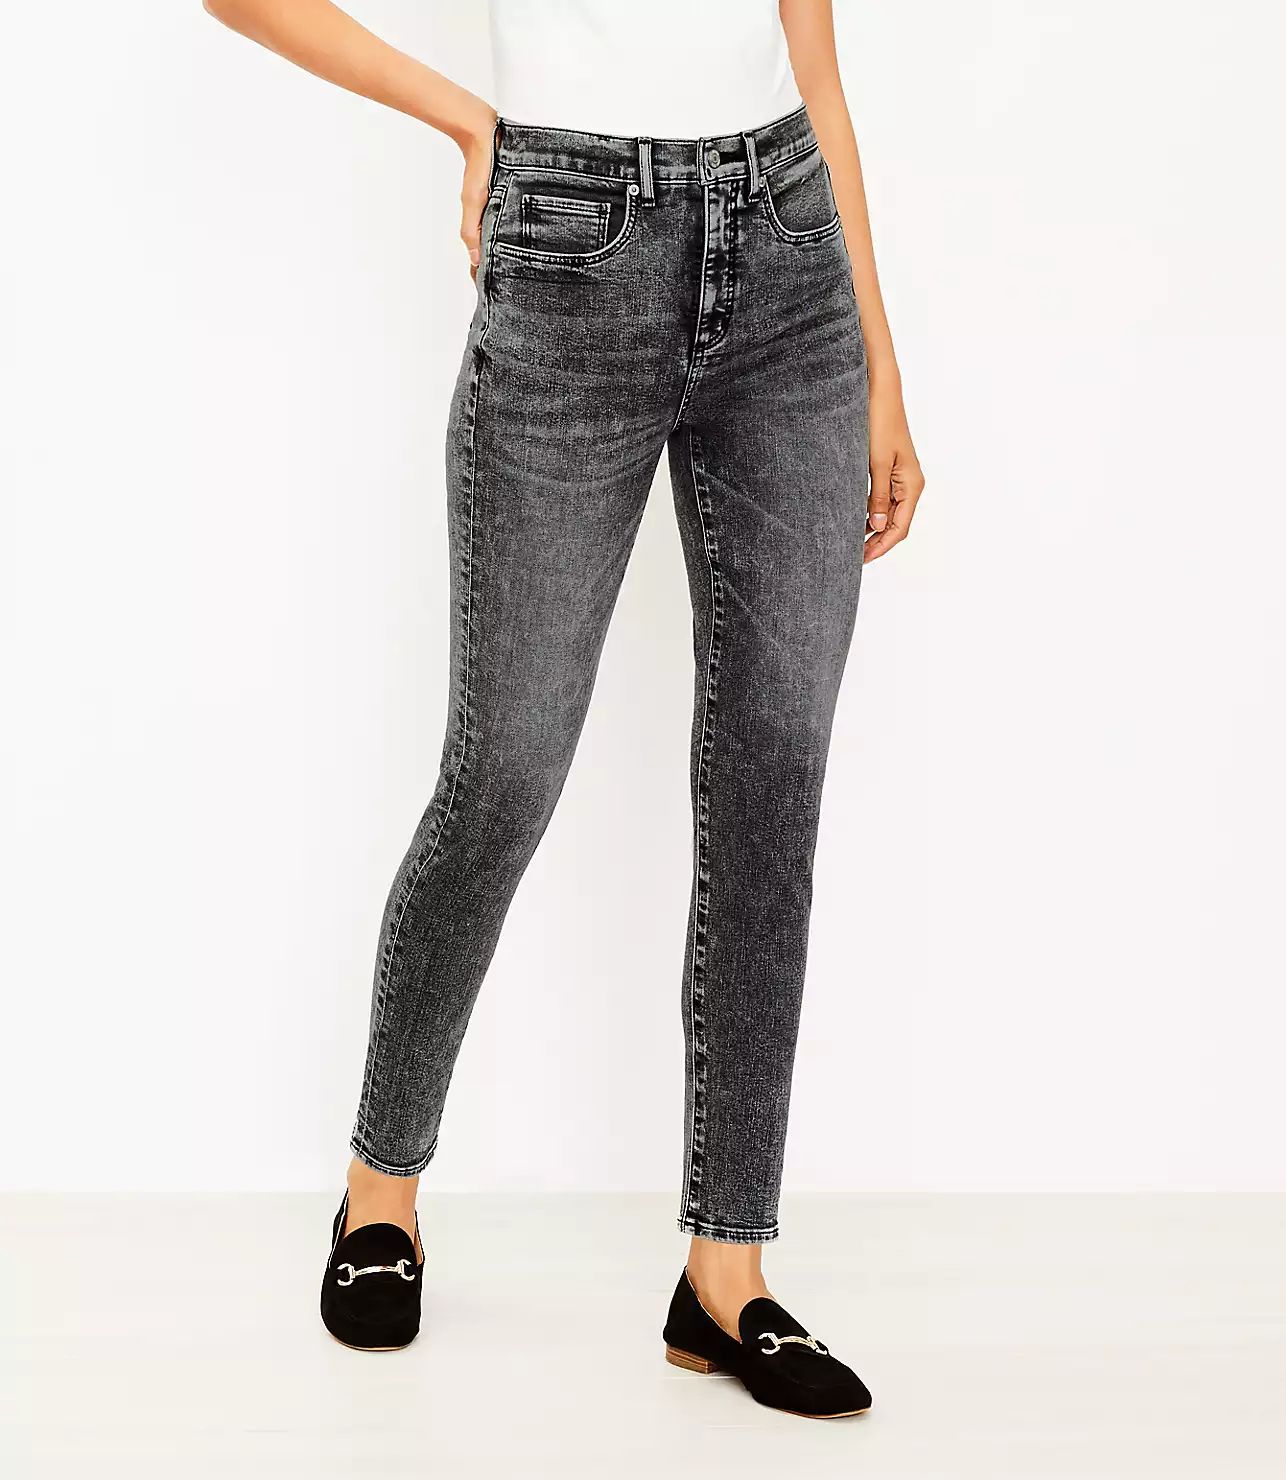 Petite High Rise Skinny Jeans in Washed Black Wash | LOFT